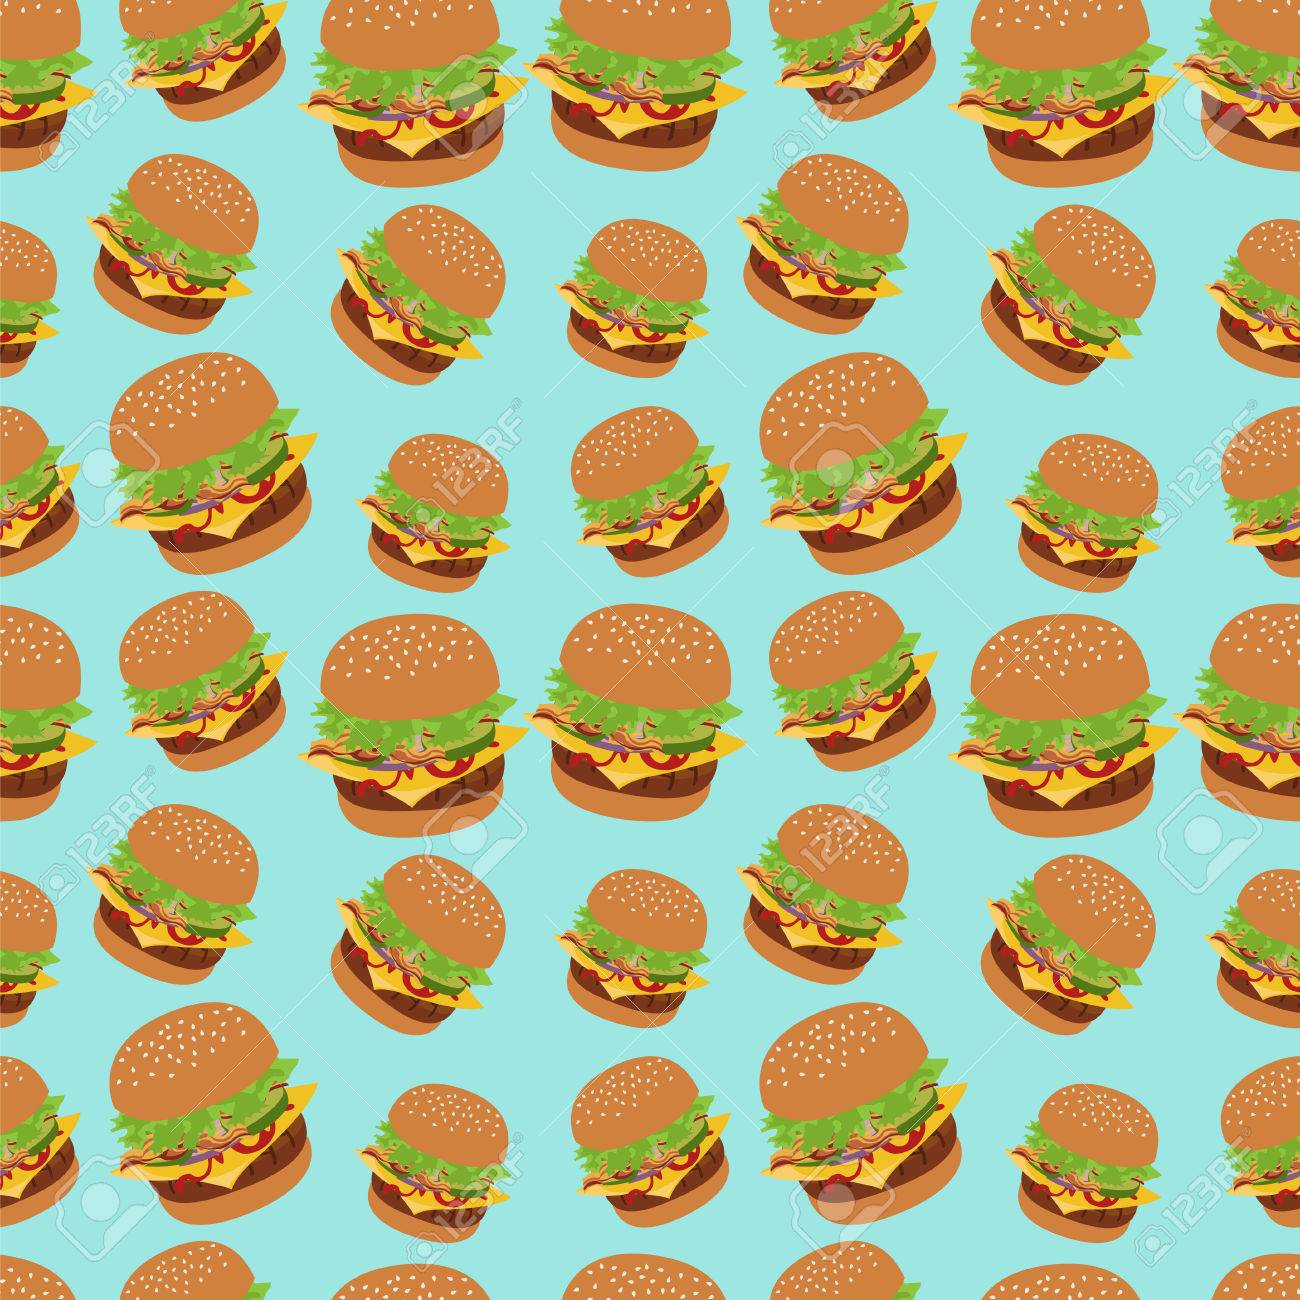 Seamless Vector Pattern With Burger Image Cheeseburger Blue